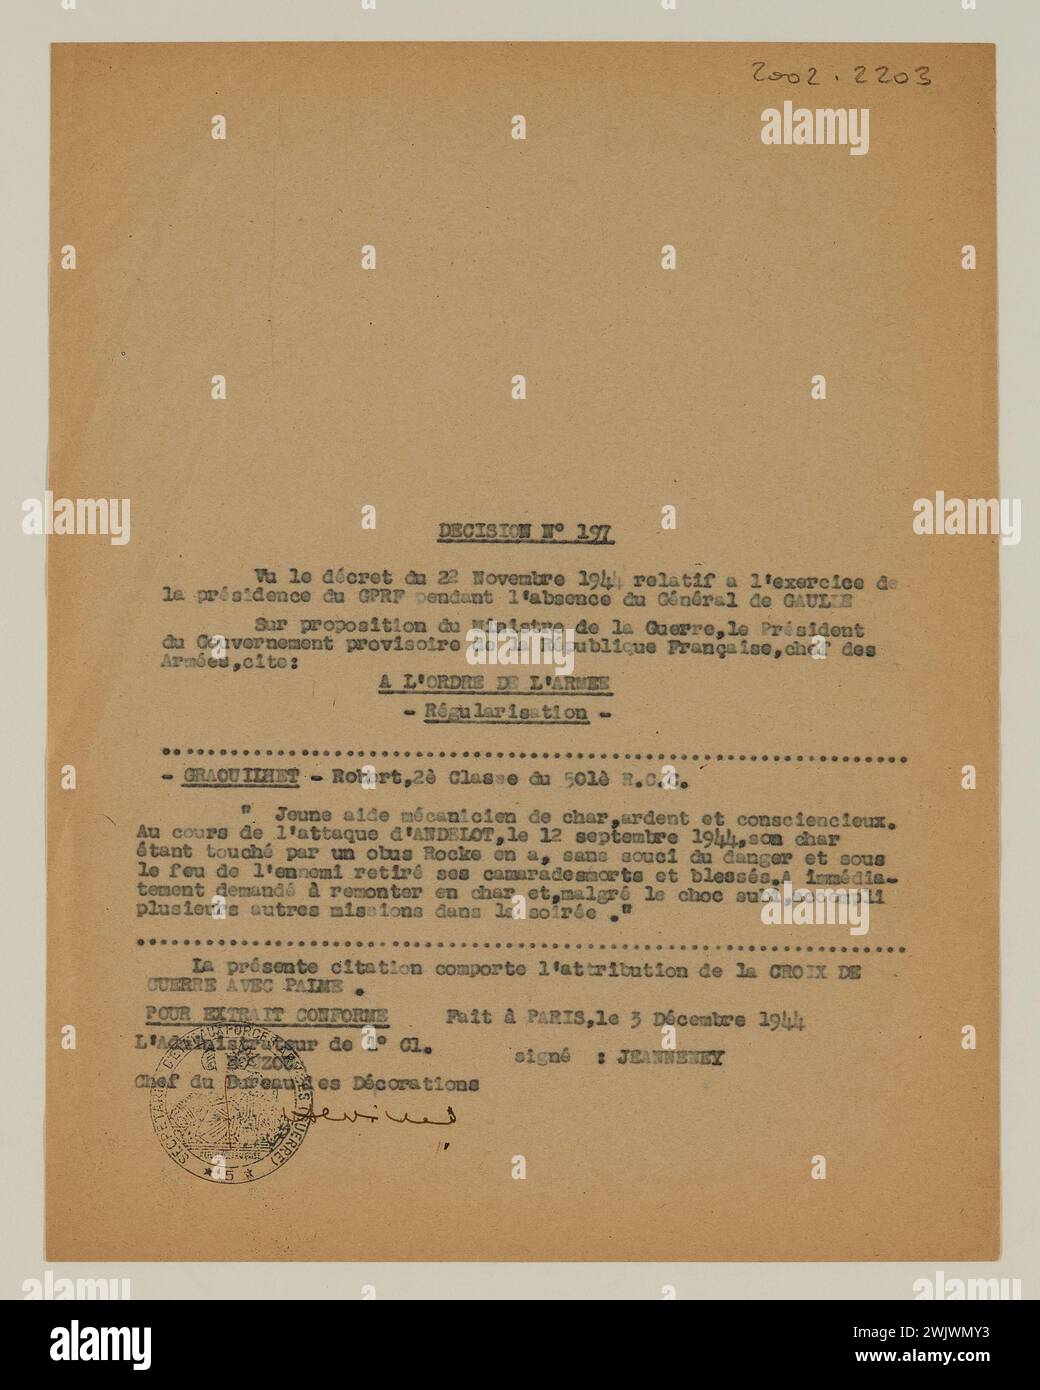 Gaulle, Charles de, General (1890-11-22 - 1970-11-09), decision n ° 197 - the president of the GPRF, chief of the armies, quotes to the order of the army - regularization - Robert Graouilhet, 2nd Class of the 501st RCC (title awarded), 1944-12-03. Paper, ink. General Leclerc Museum of the Liberation of Paris - Jean Moulin Museum. Stock Photo